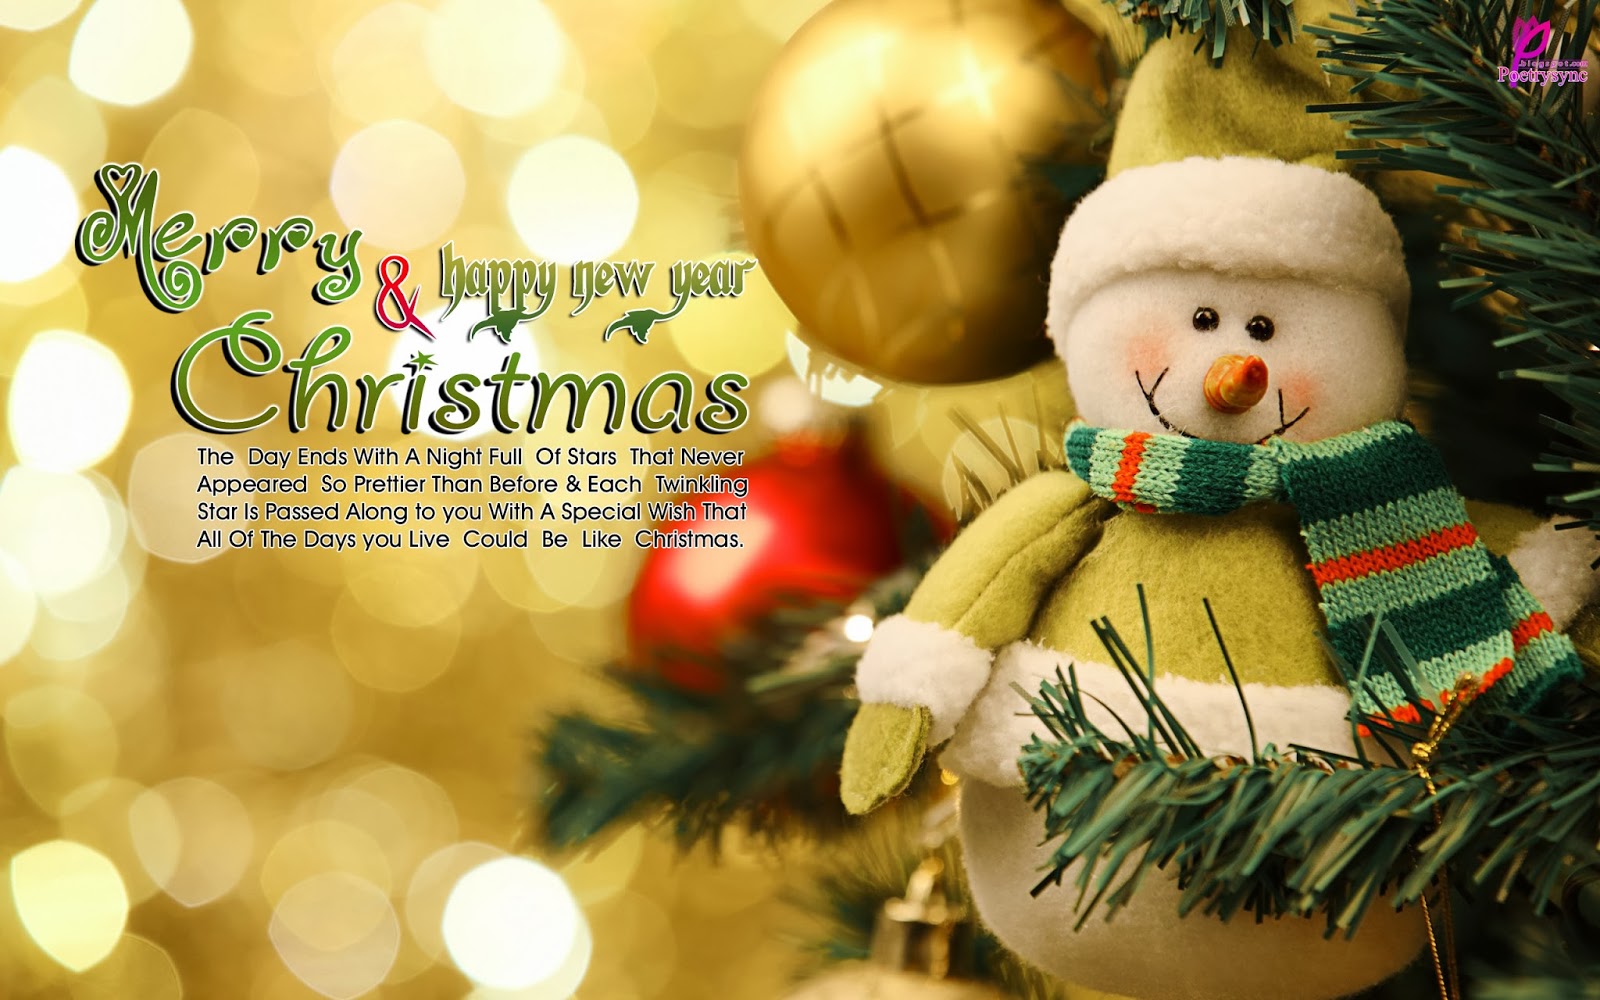 Merrychristmas Instagram Photos - Merry Christmas And Happy New Year 2019 - HD Wallpaper 